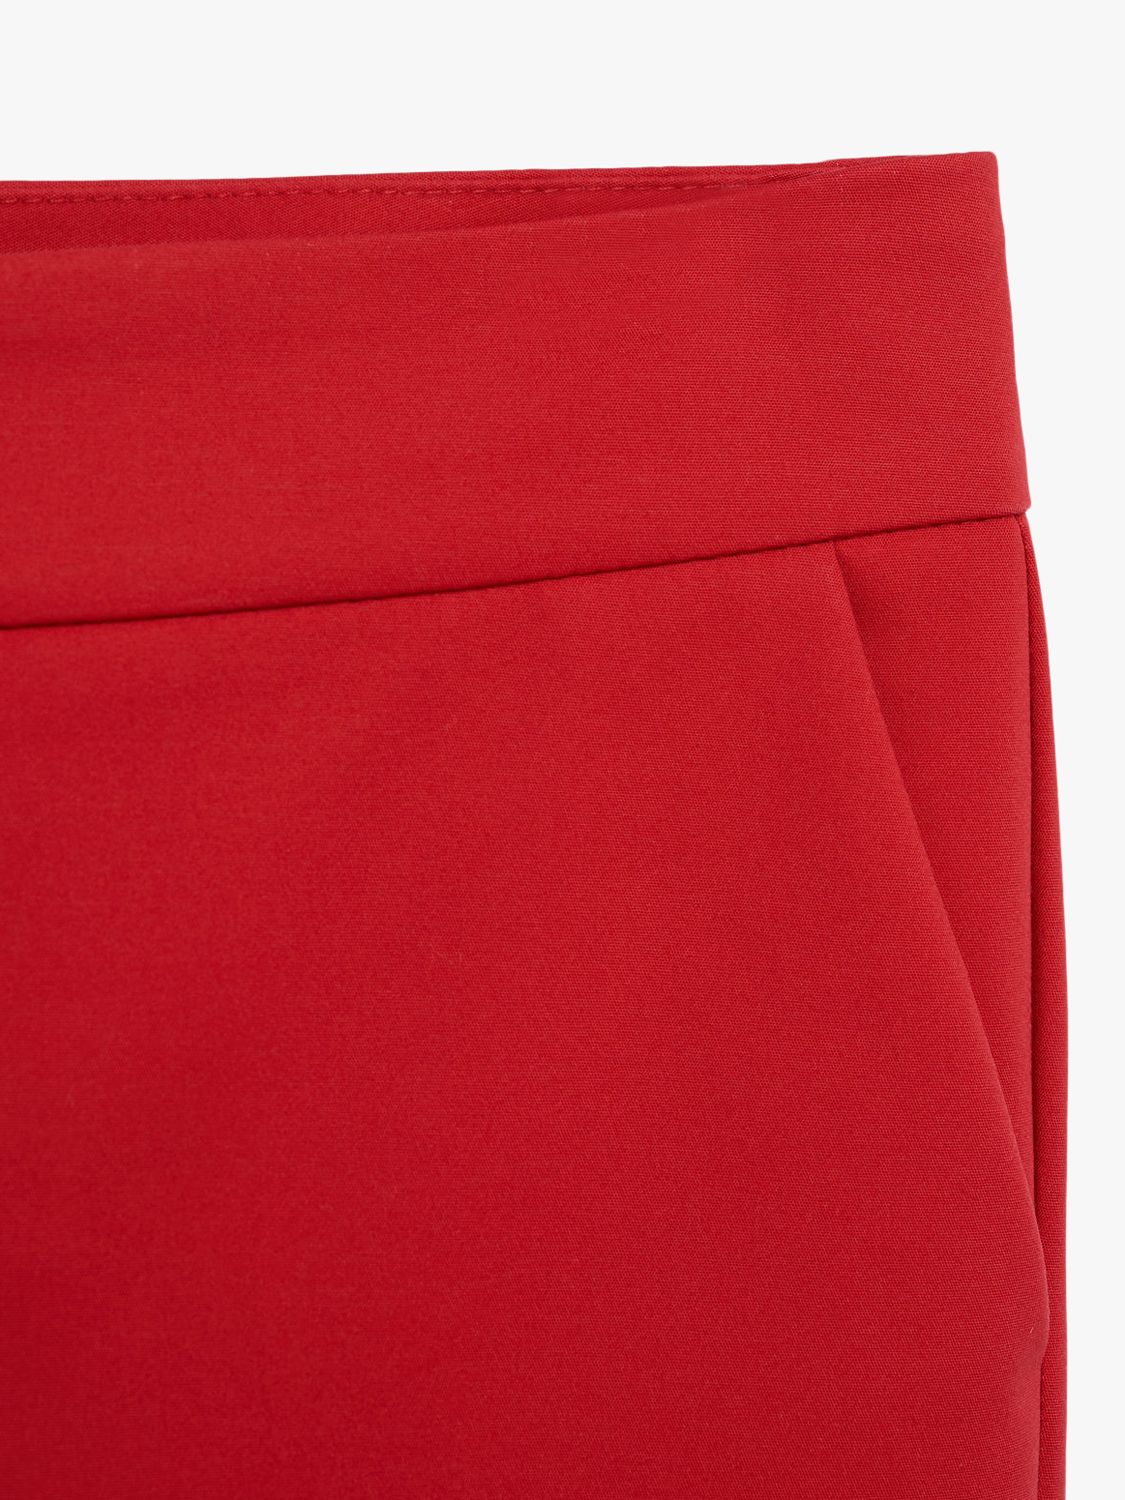 Mango Suit Slim Fit Trousers, Red at John Lewis & Partners